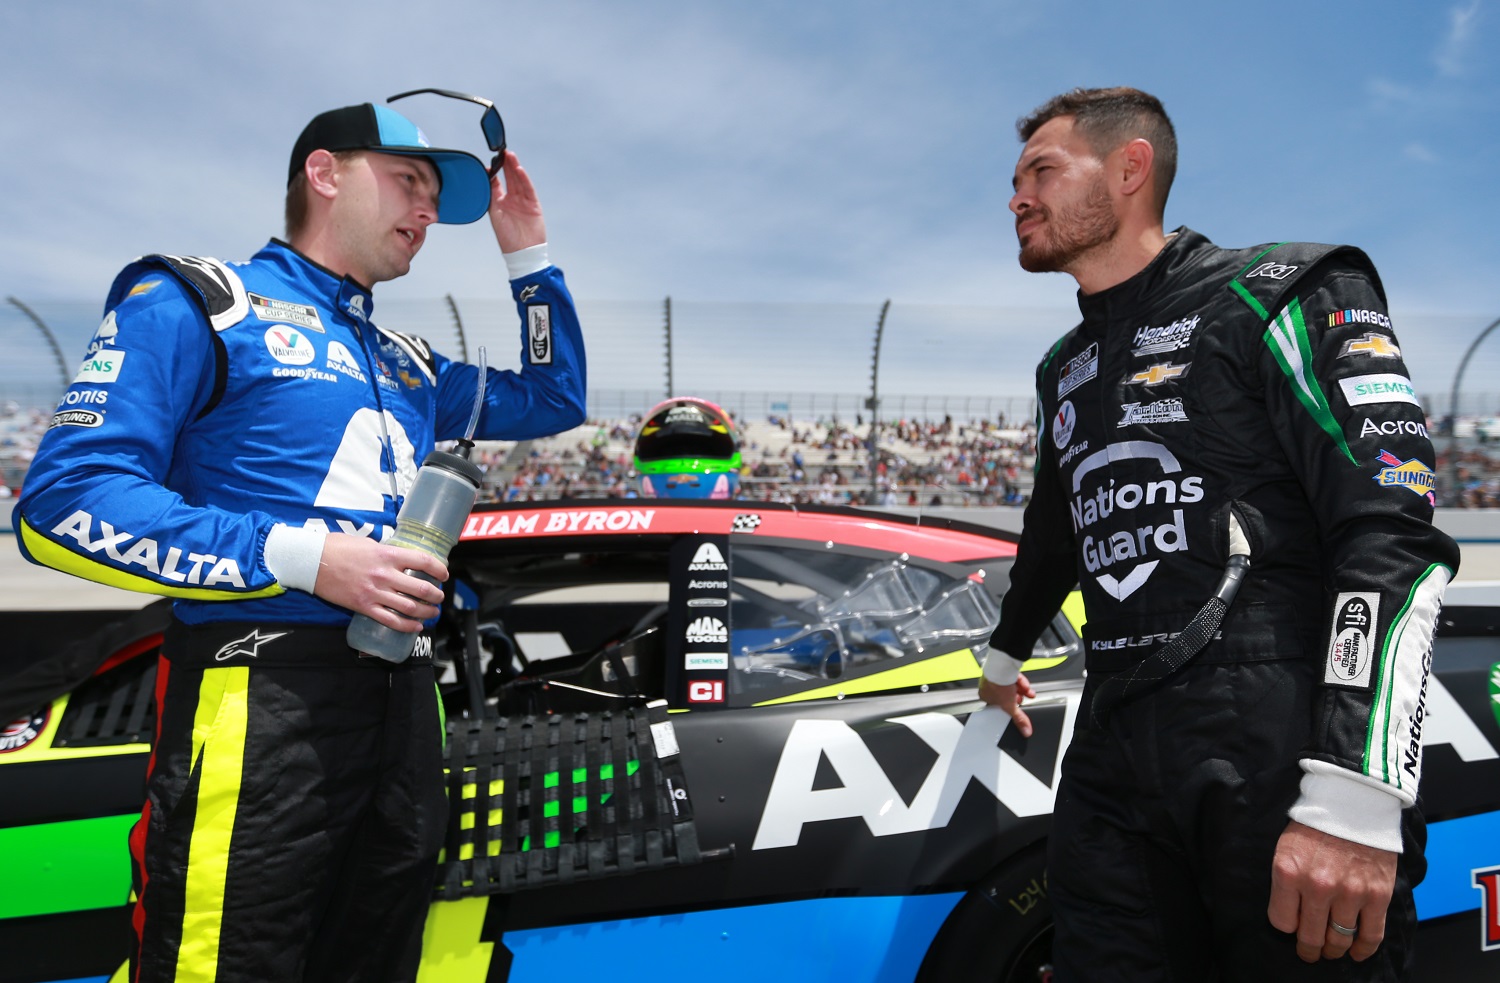 Hendrick Motorsports teammates William Byron and Kyle Larson talk on the grid at the NASCAR Cup Series Drydene 400 at Dover International Speedway on May 16, 2021.